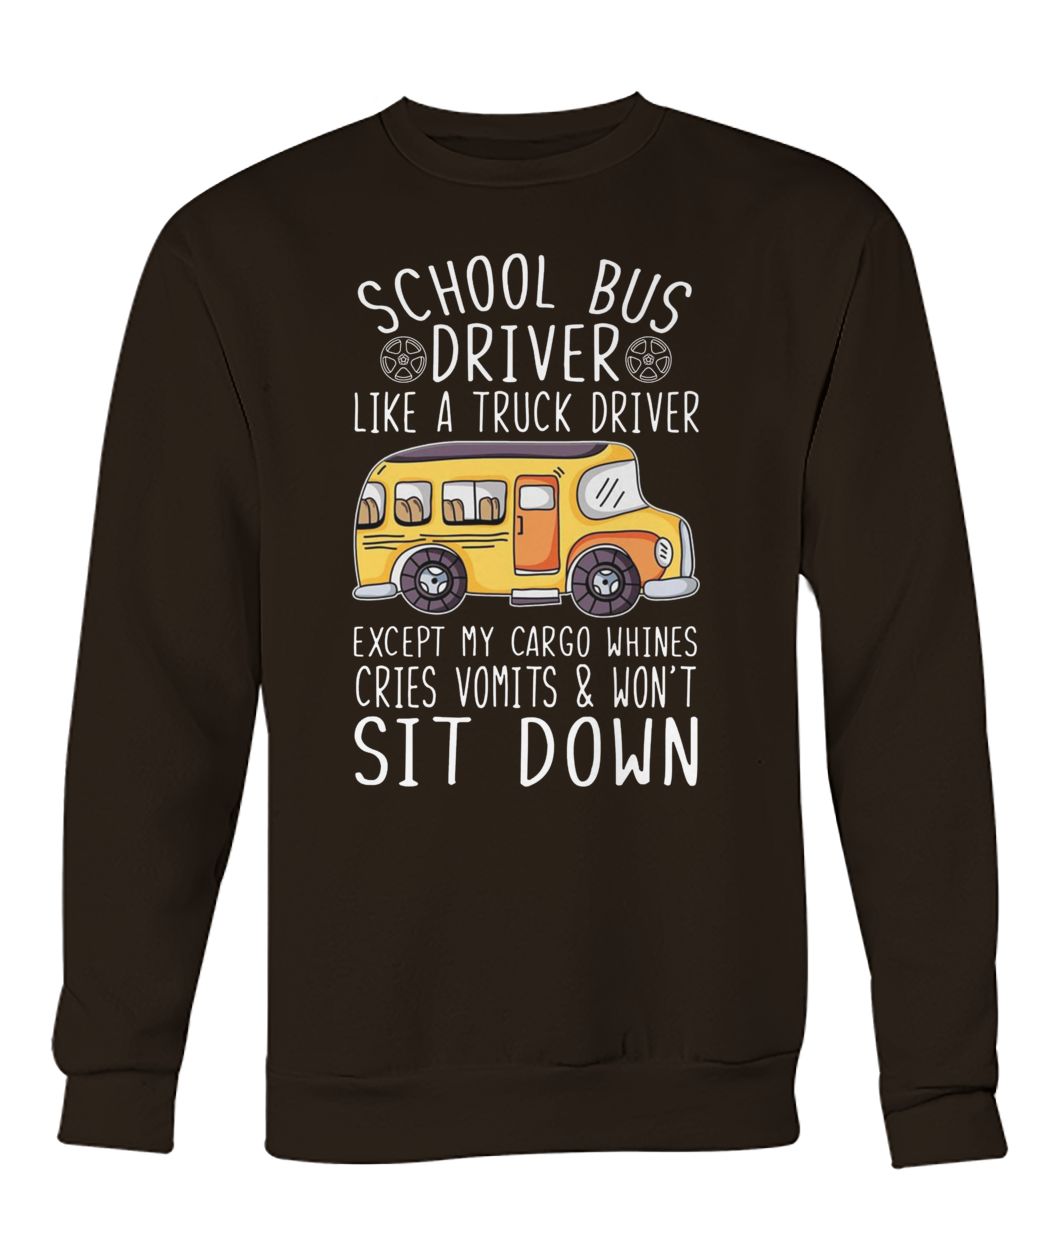 School bus driver I'm like a truck driver except my cargo whines crew neck sweatshirt